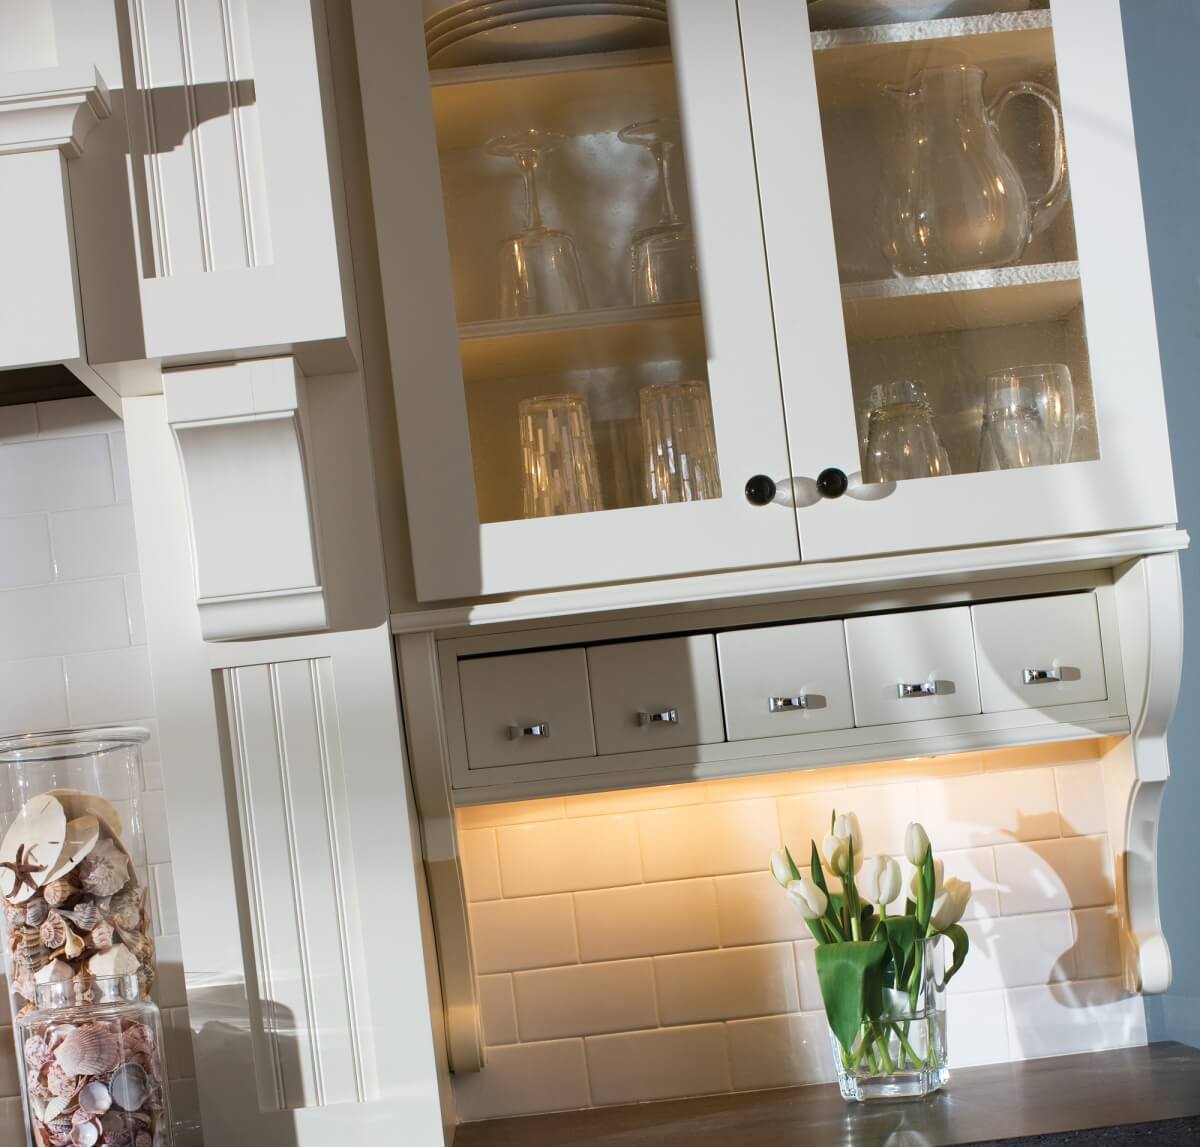 Glass cabinet doors in a cottage style kitchen design with Dura Supreme Cabinetry.